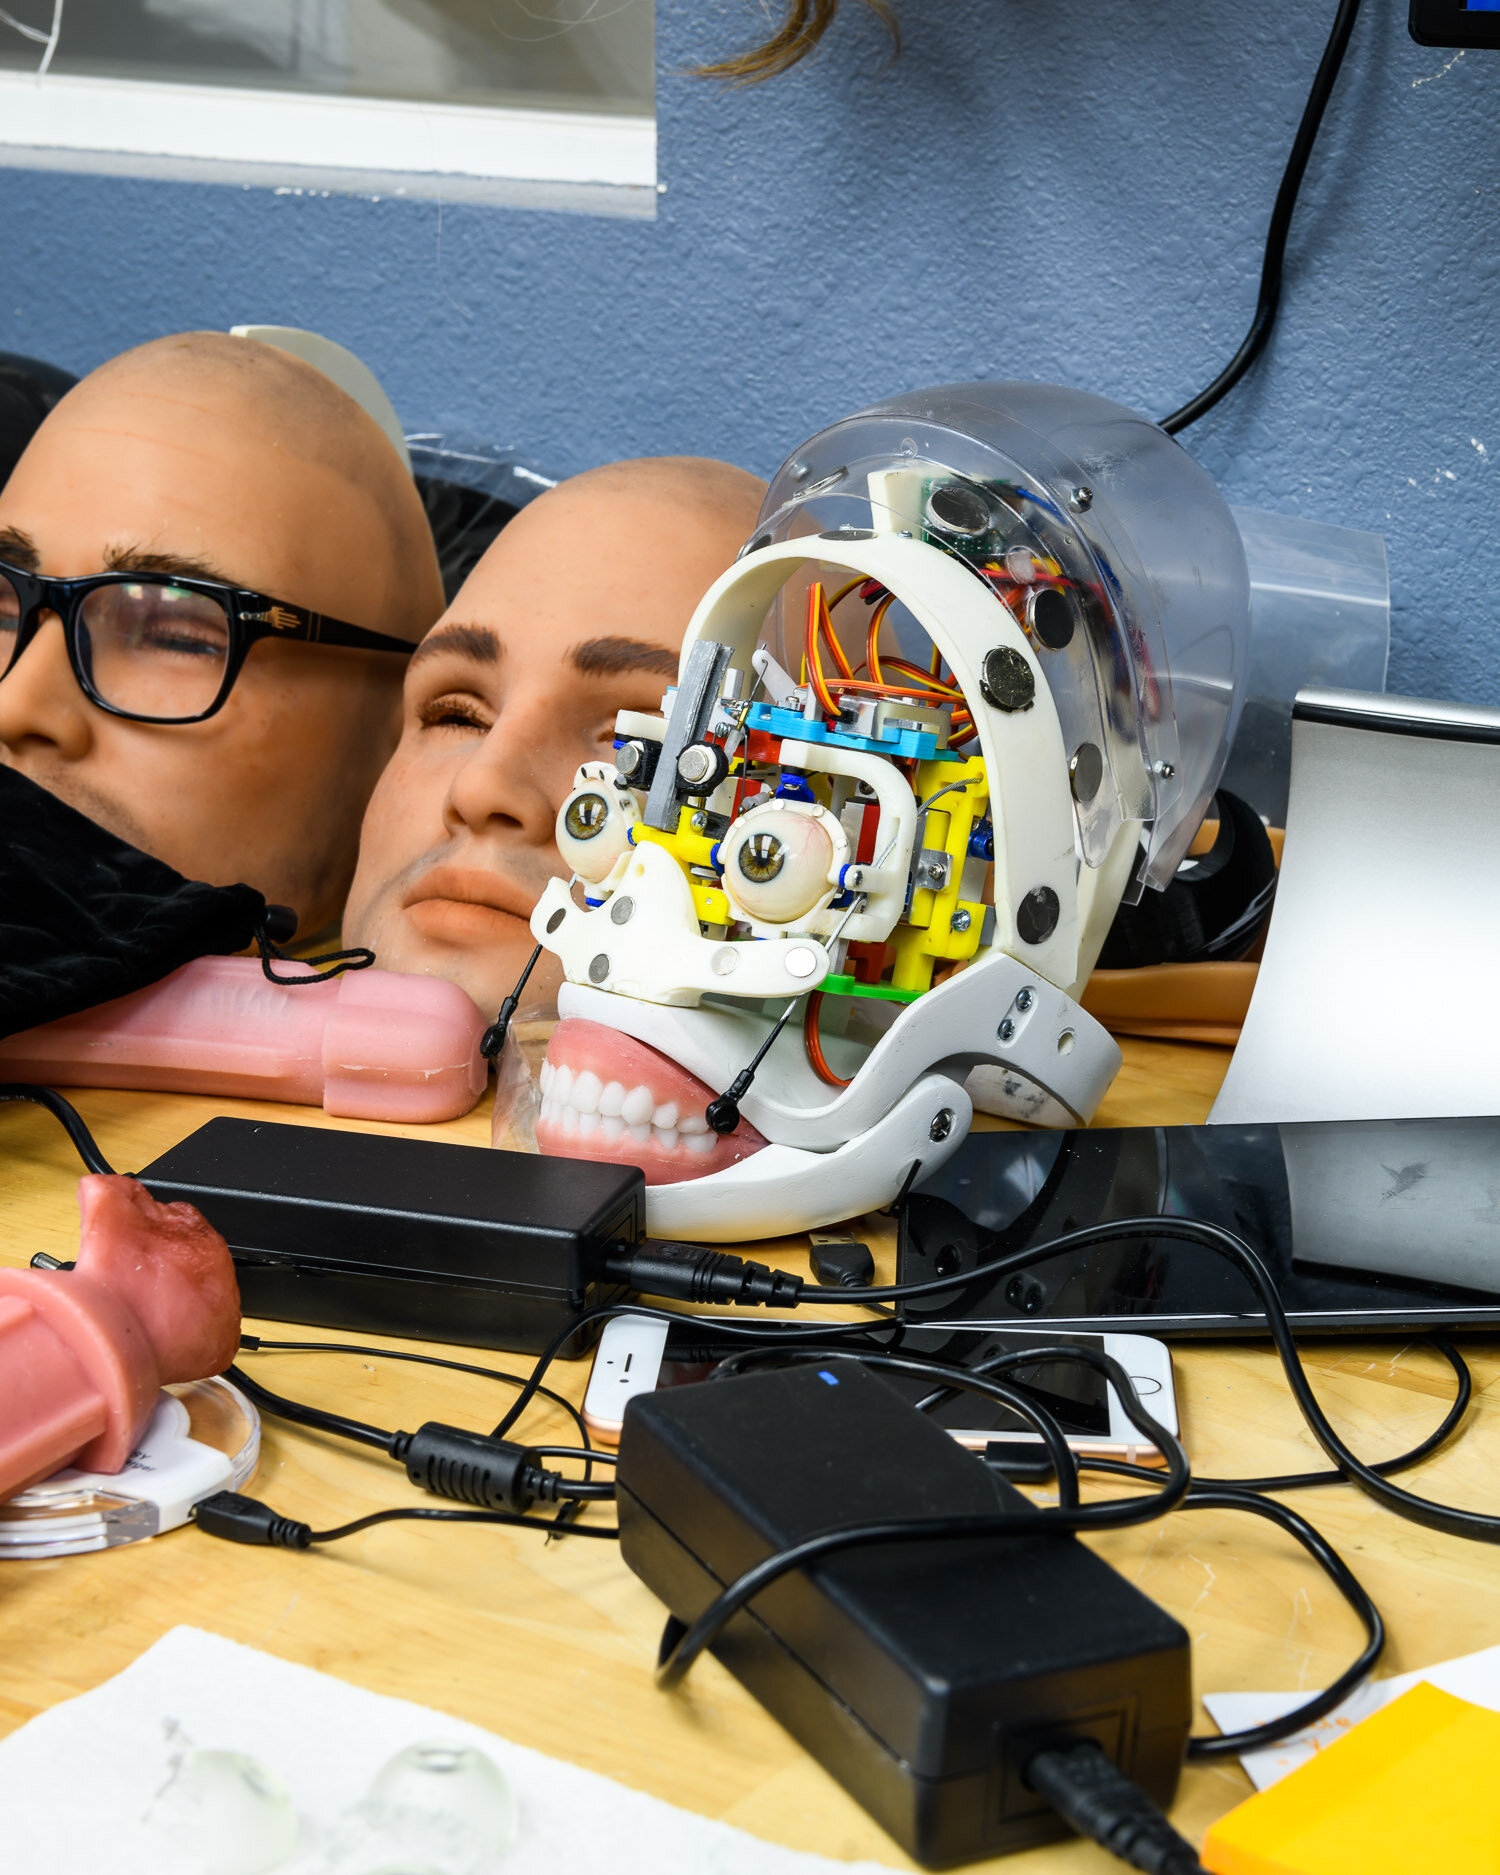  A robotic head at the RealDoll robot workshop in San Marcos, California. 